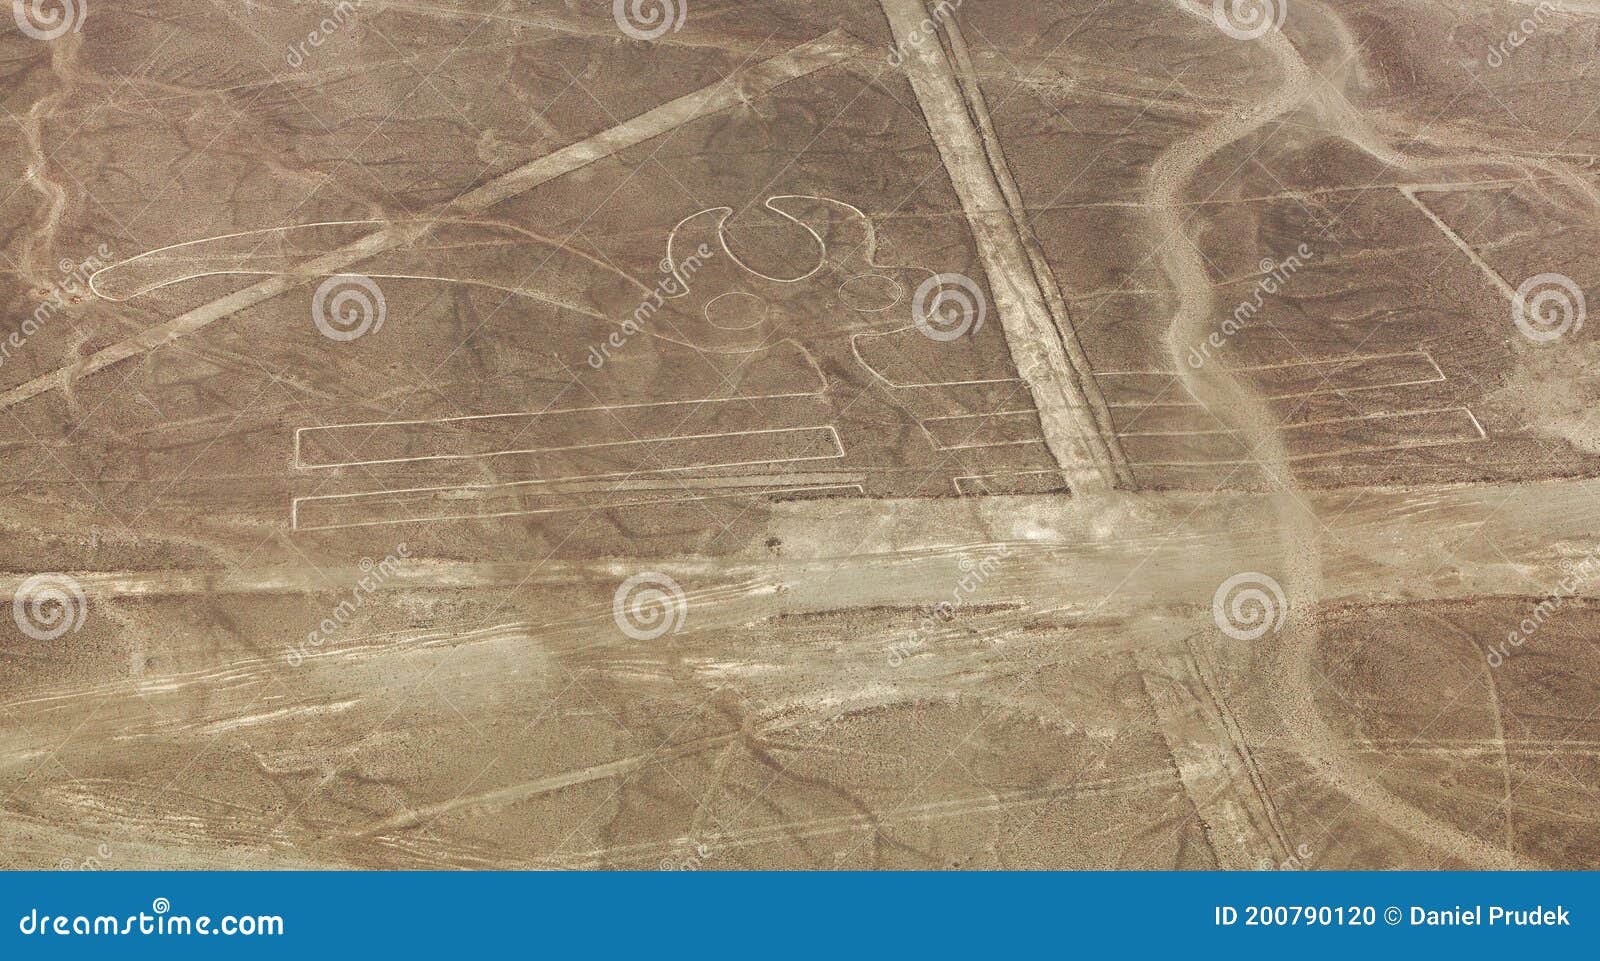 parrot geoglyph, nazca or nasca mysterious lines, peru